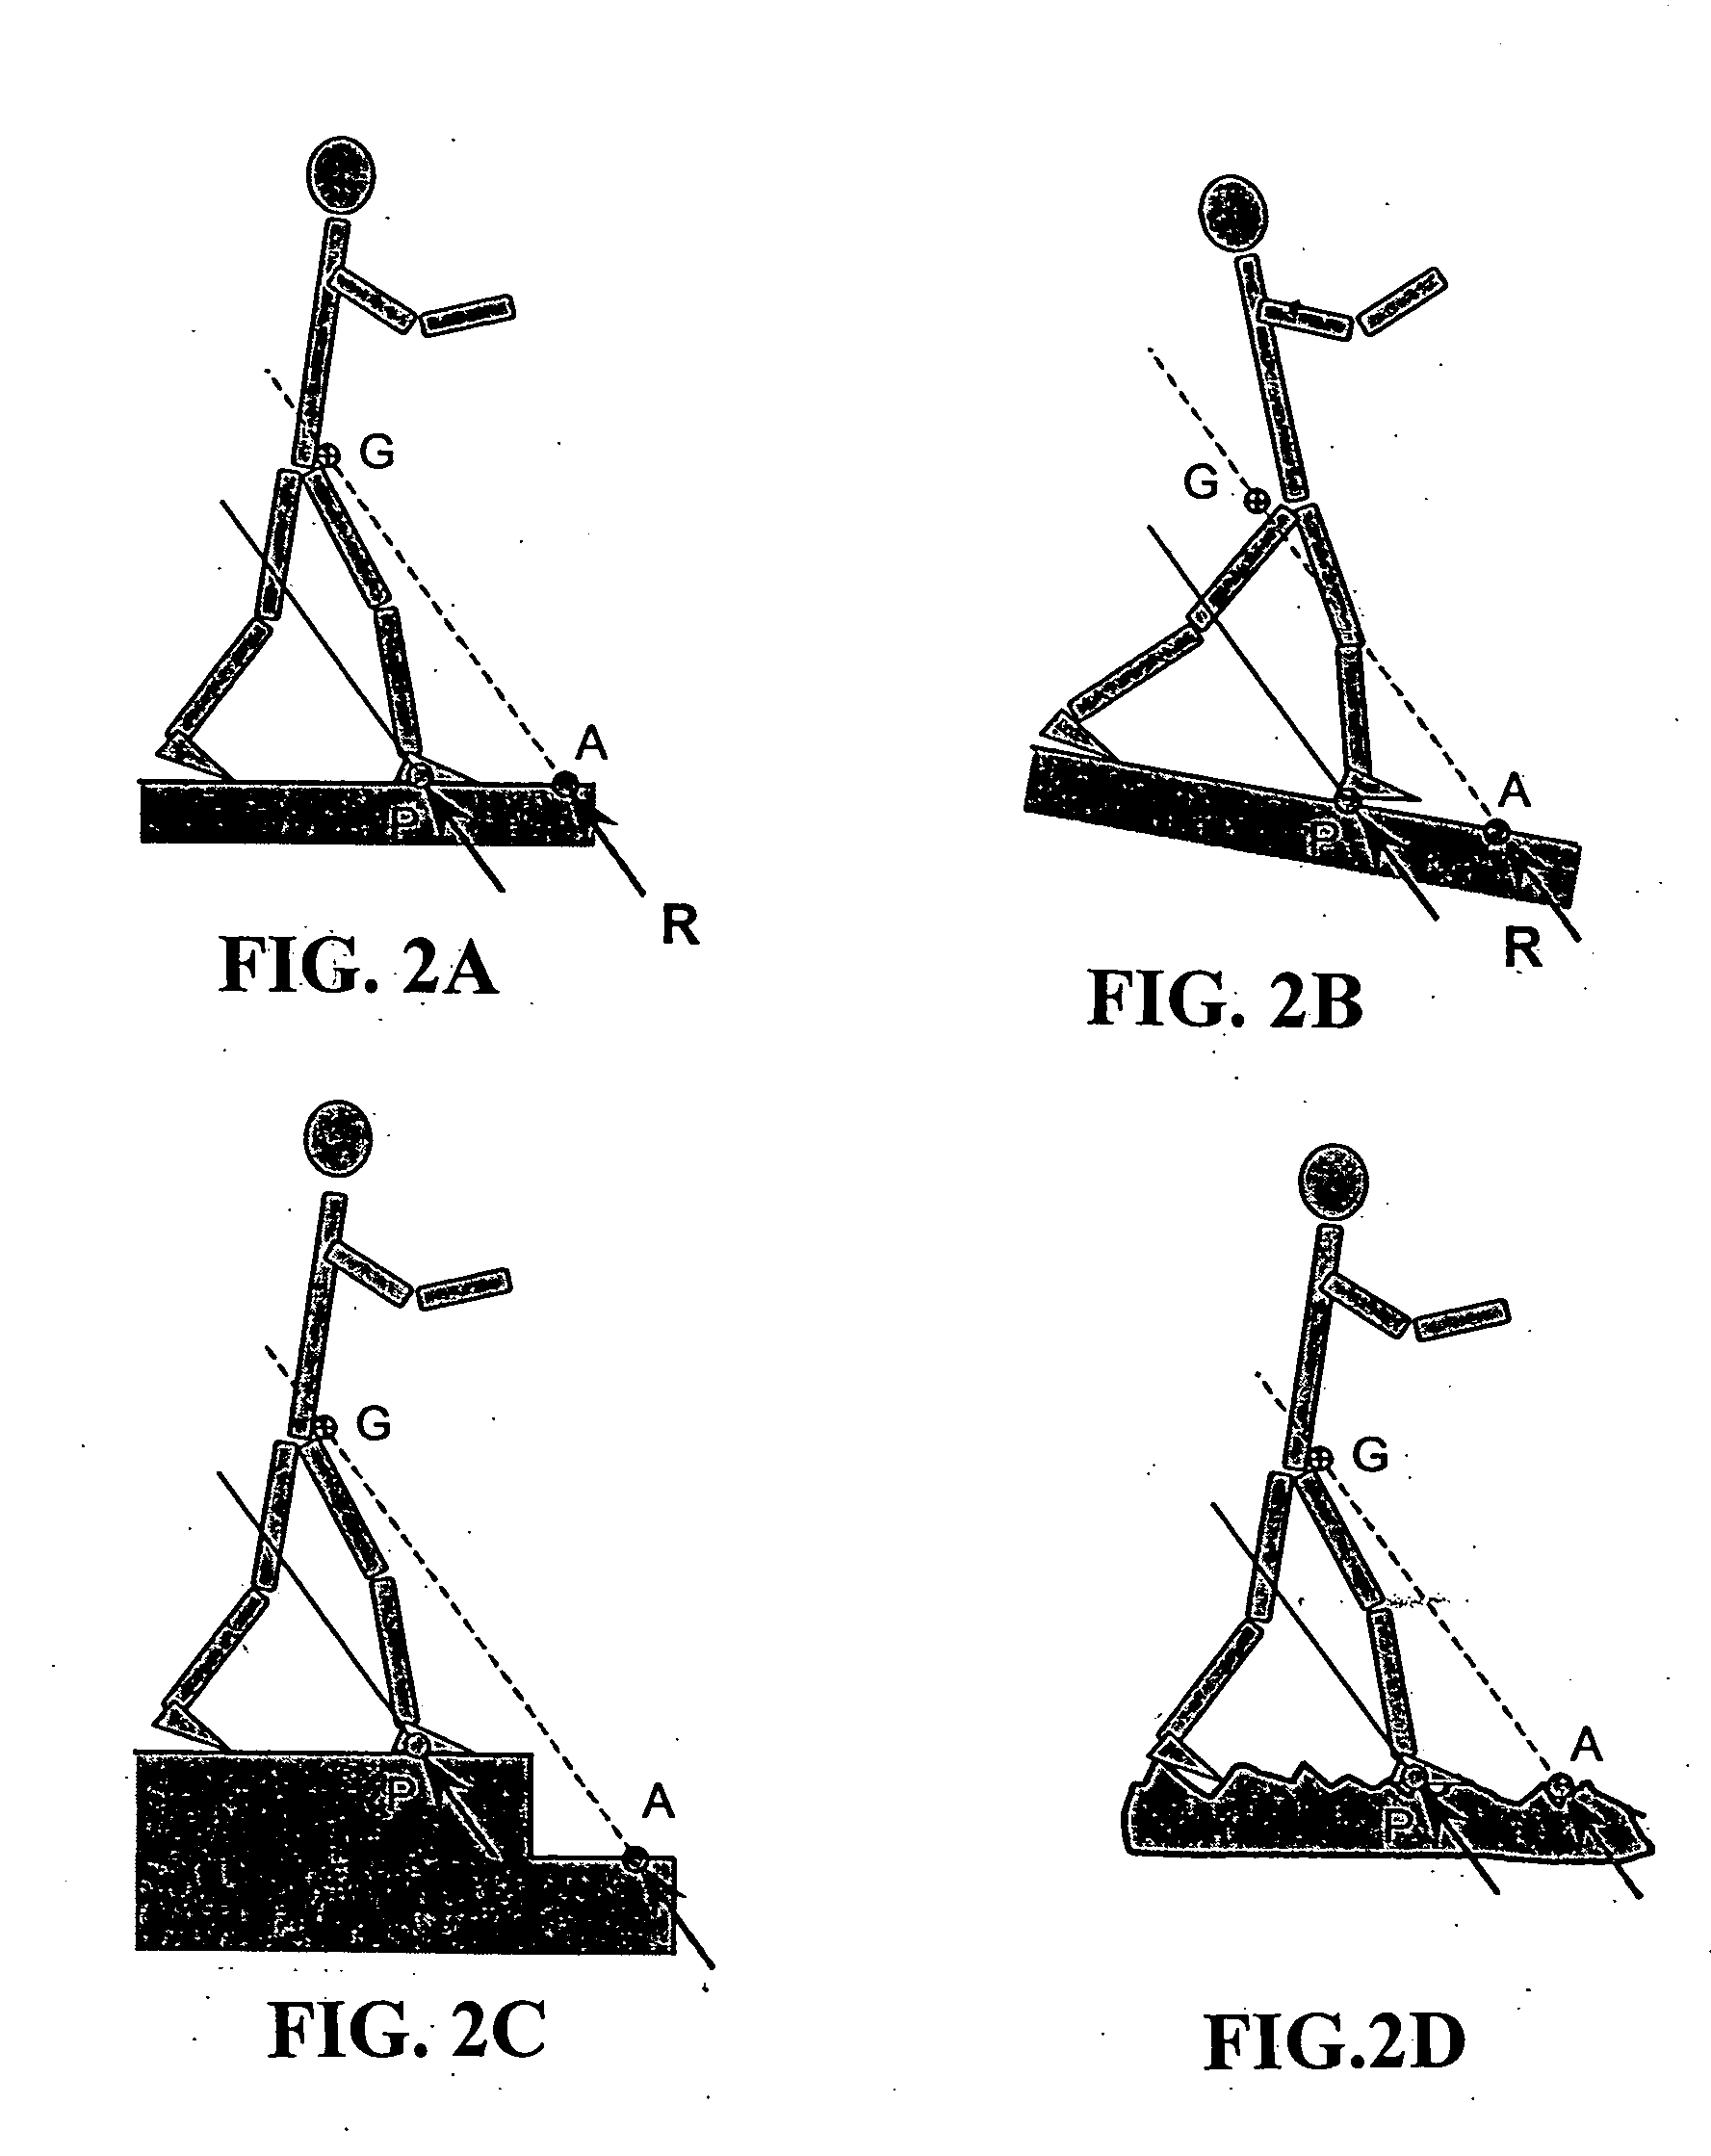 Systems and methods for controlling a legged robot based on rate of change of angular momentum